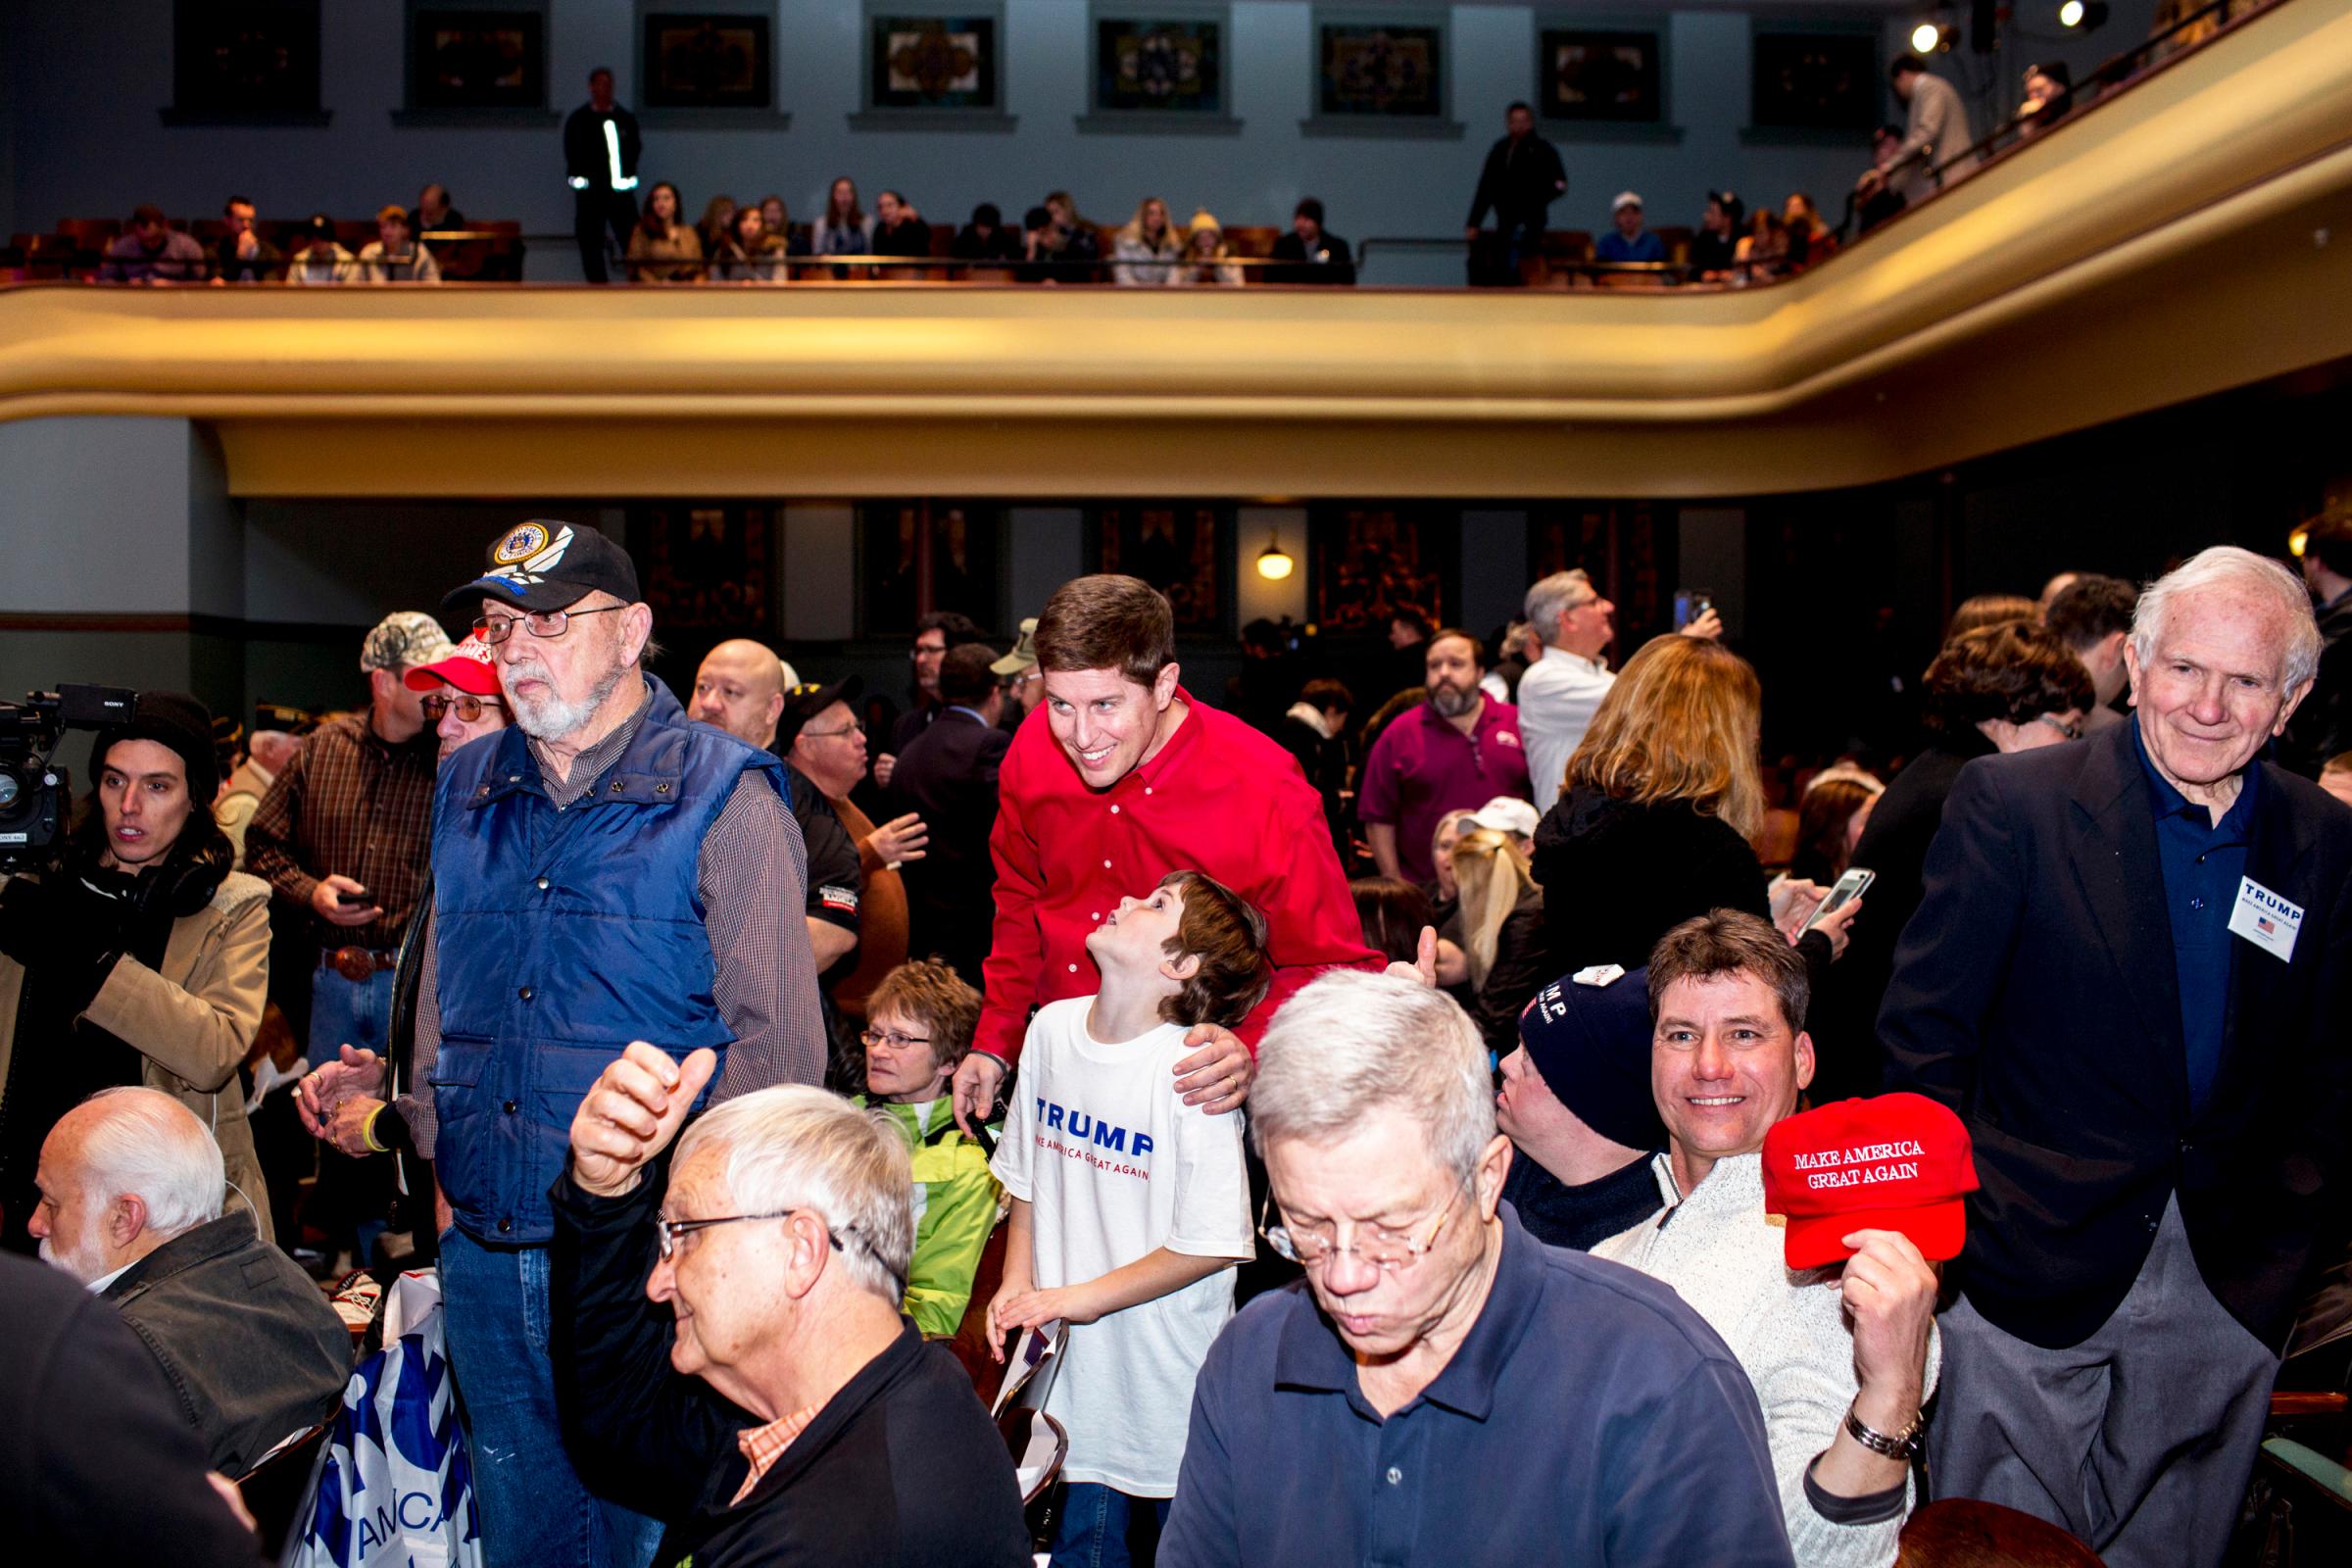 TIMEPOL Attendees at a Donald Trump rally in Des Moines, Iowa on Jan. 28, 2016.